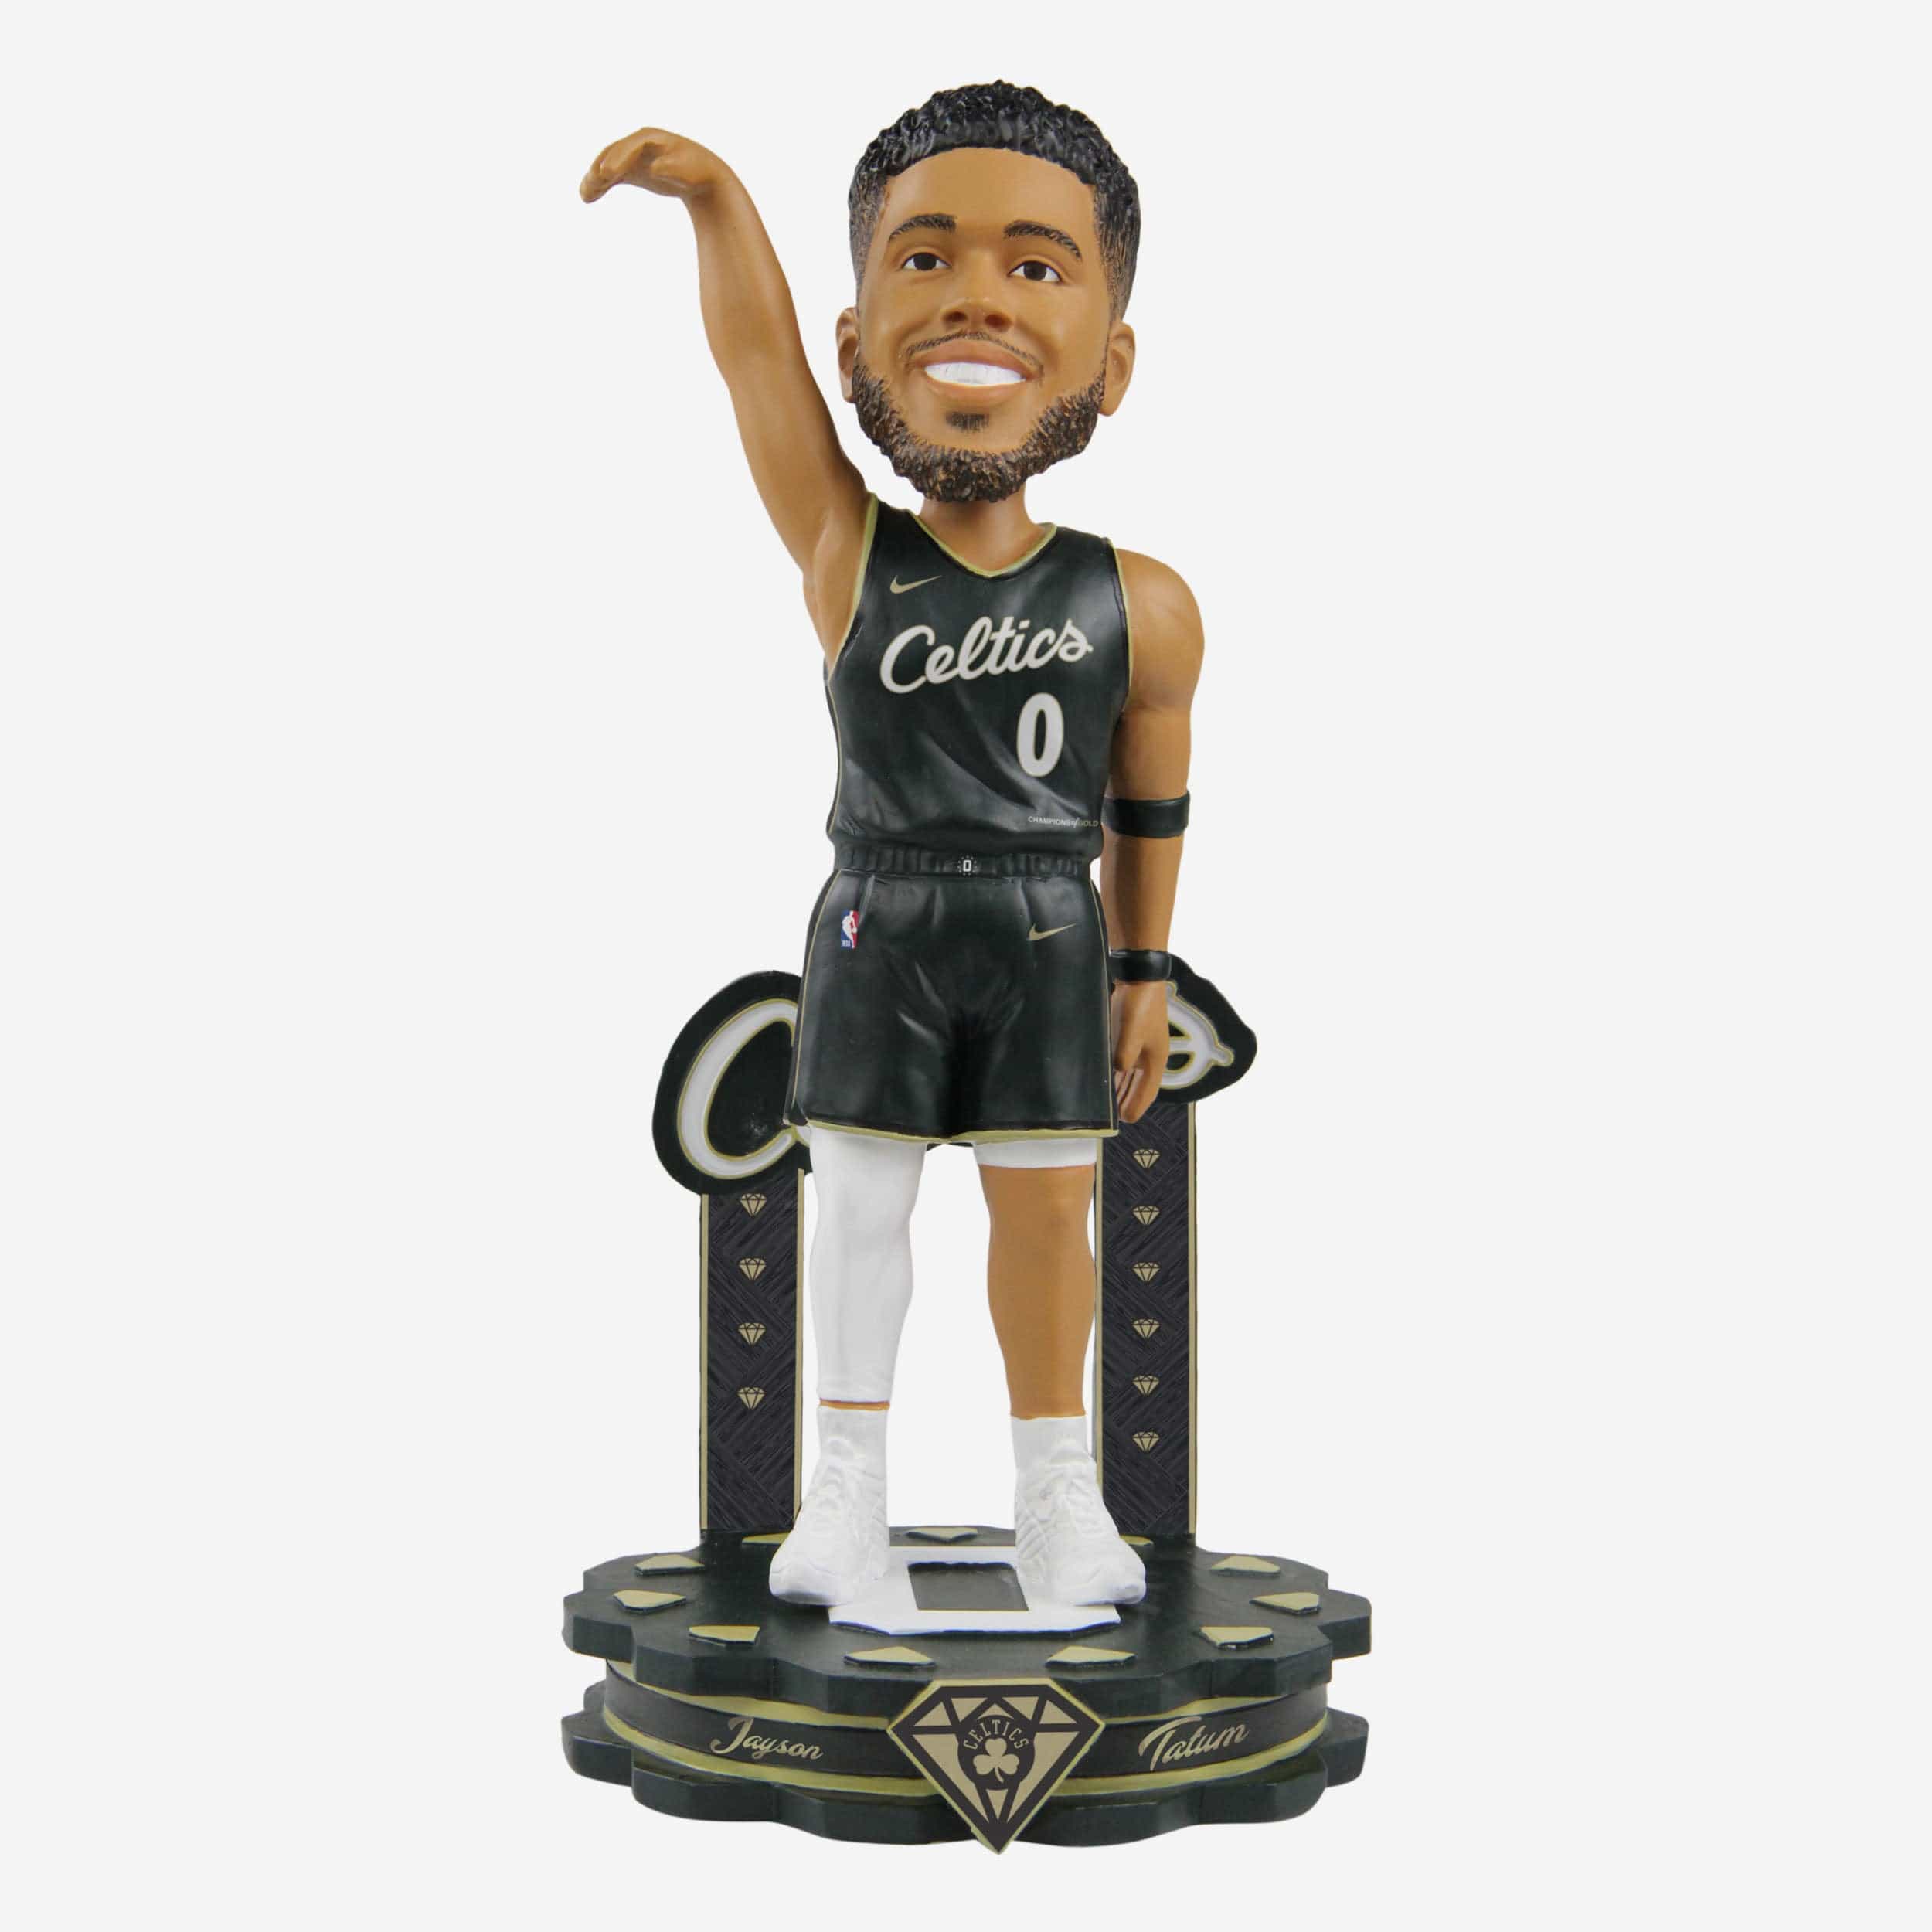 Kristaps Porzingis Washington Wizards 2022 City Jersey Bobblehead Officially Licensed by NBA